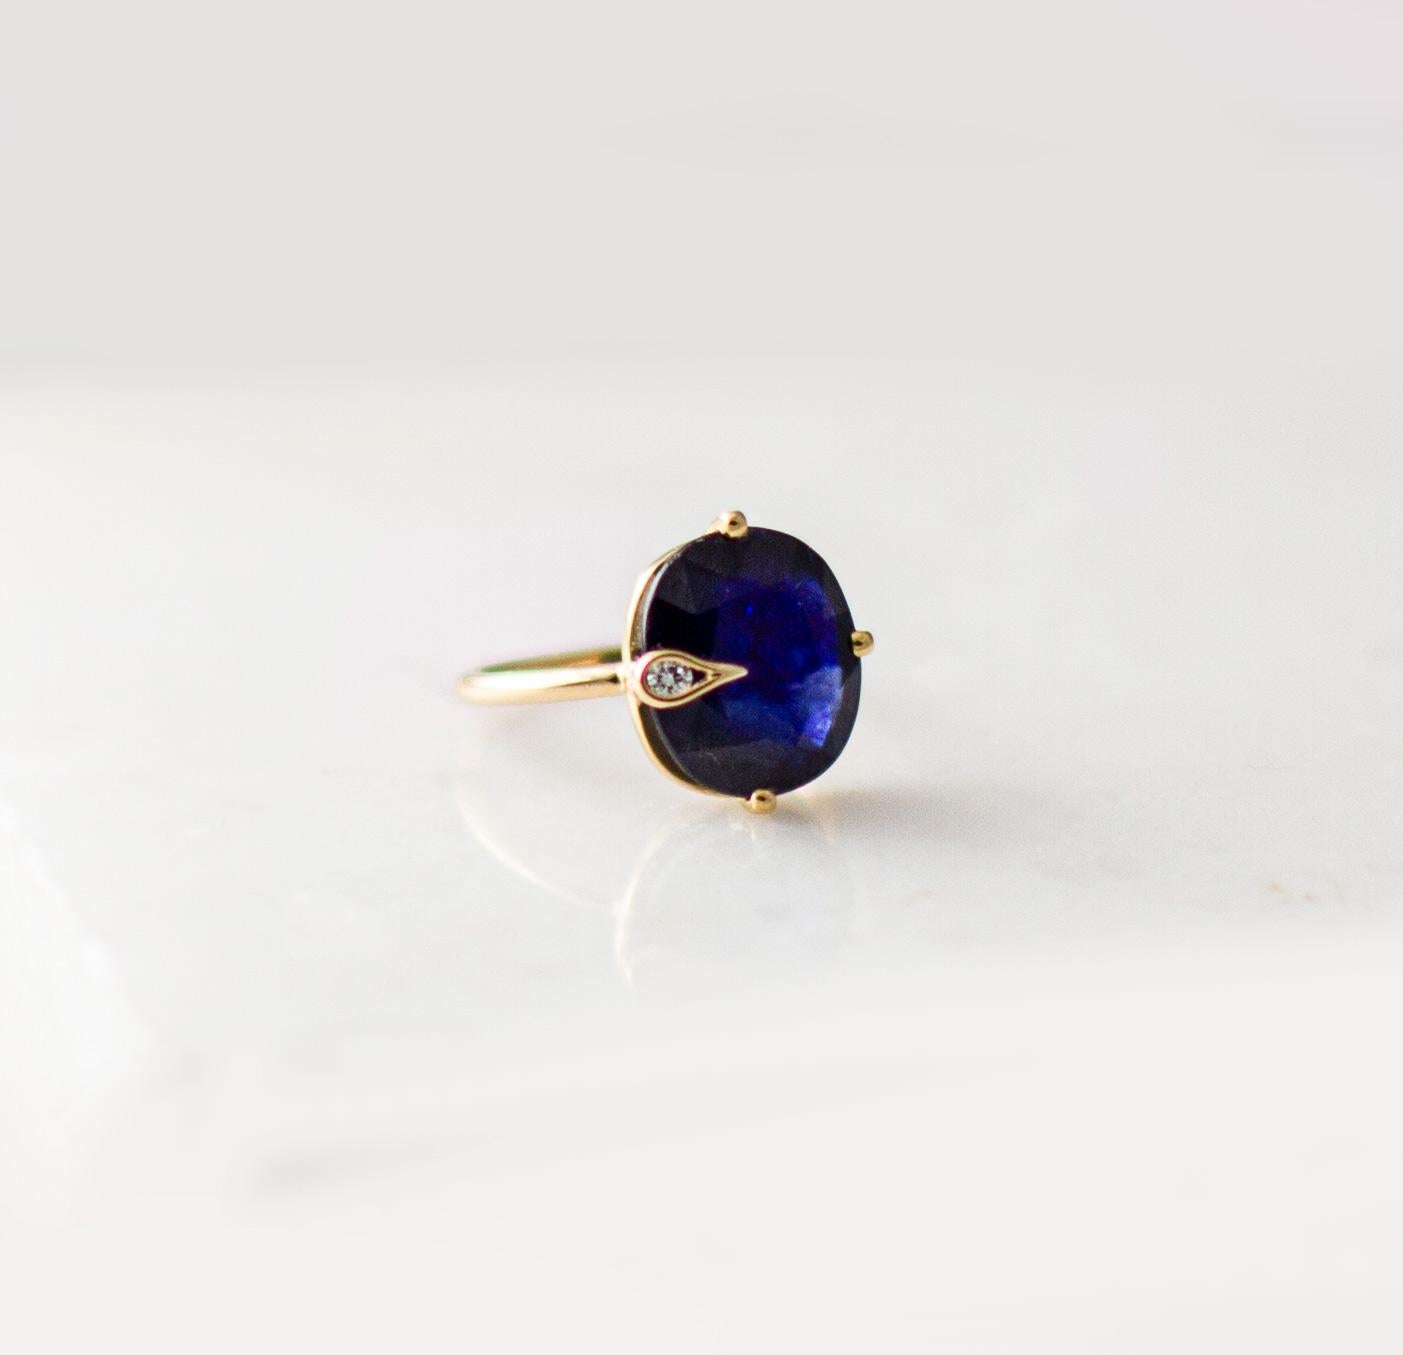 This contemporary Peacock ring is in 14 karat yellow or rose gold with treated natural cushion cut blue sapphire. The ring is easy to wear, and the gem catches eye's attention. The small round gem can be exchanged for ruby, emerald or purple, rose,